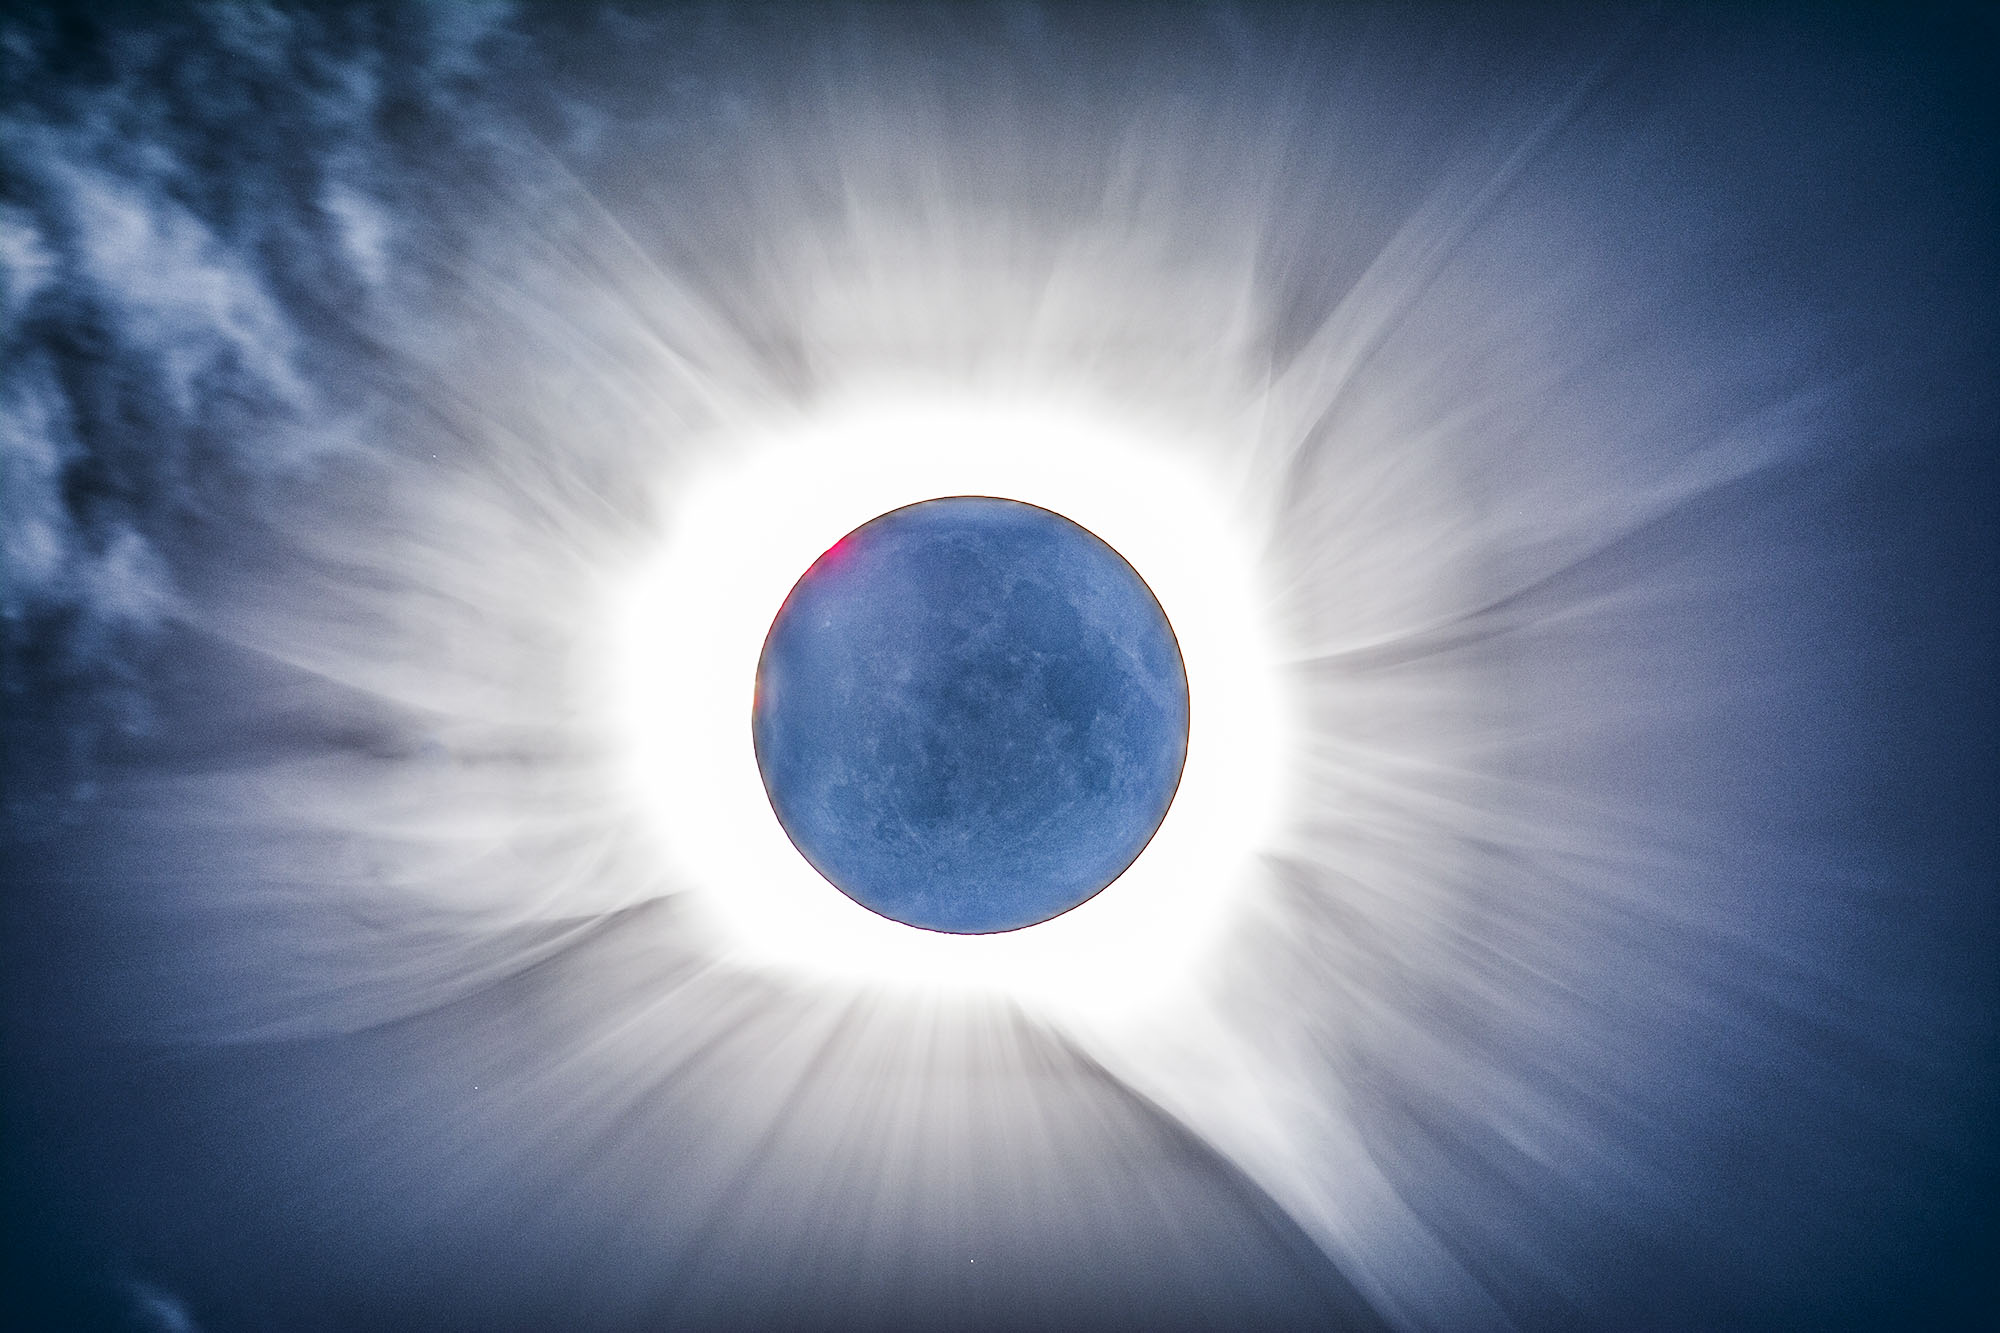 Today with modern camera technology, we can capture the majestic Solar Corona and the Earthshine in the Moon at the same time! 